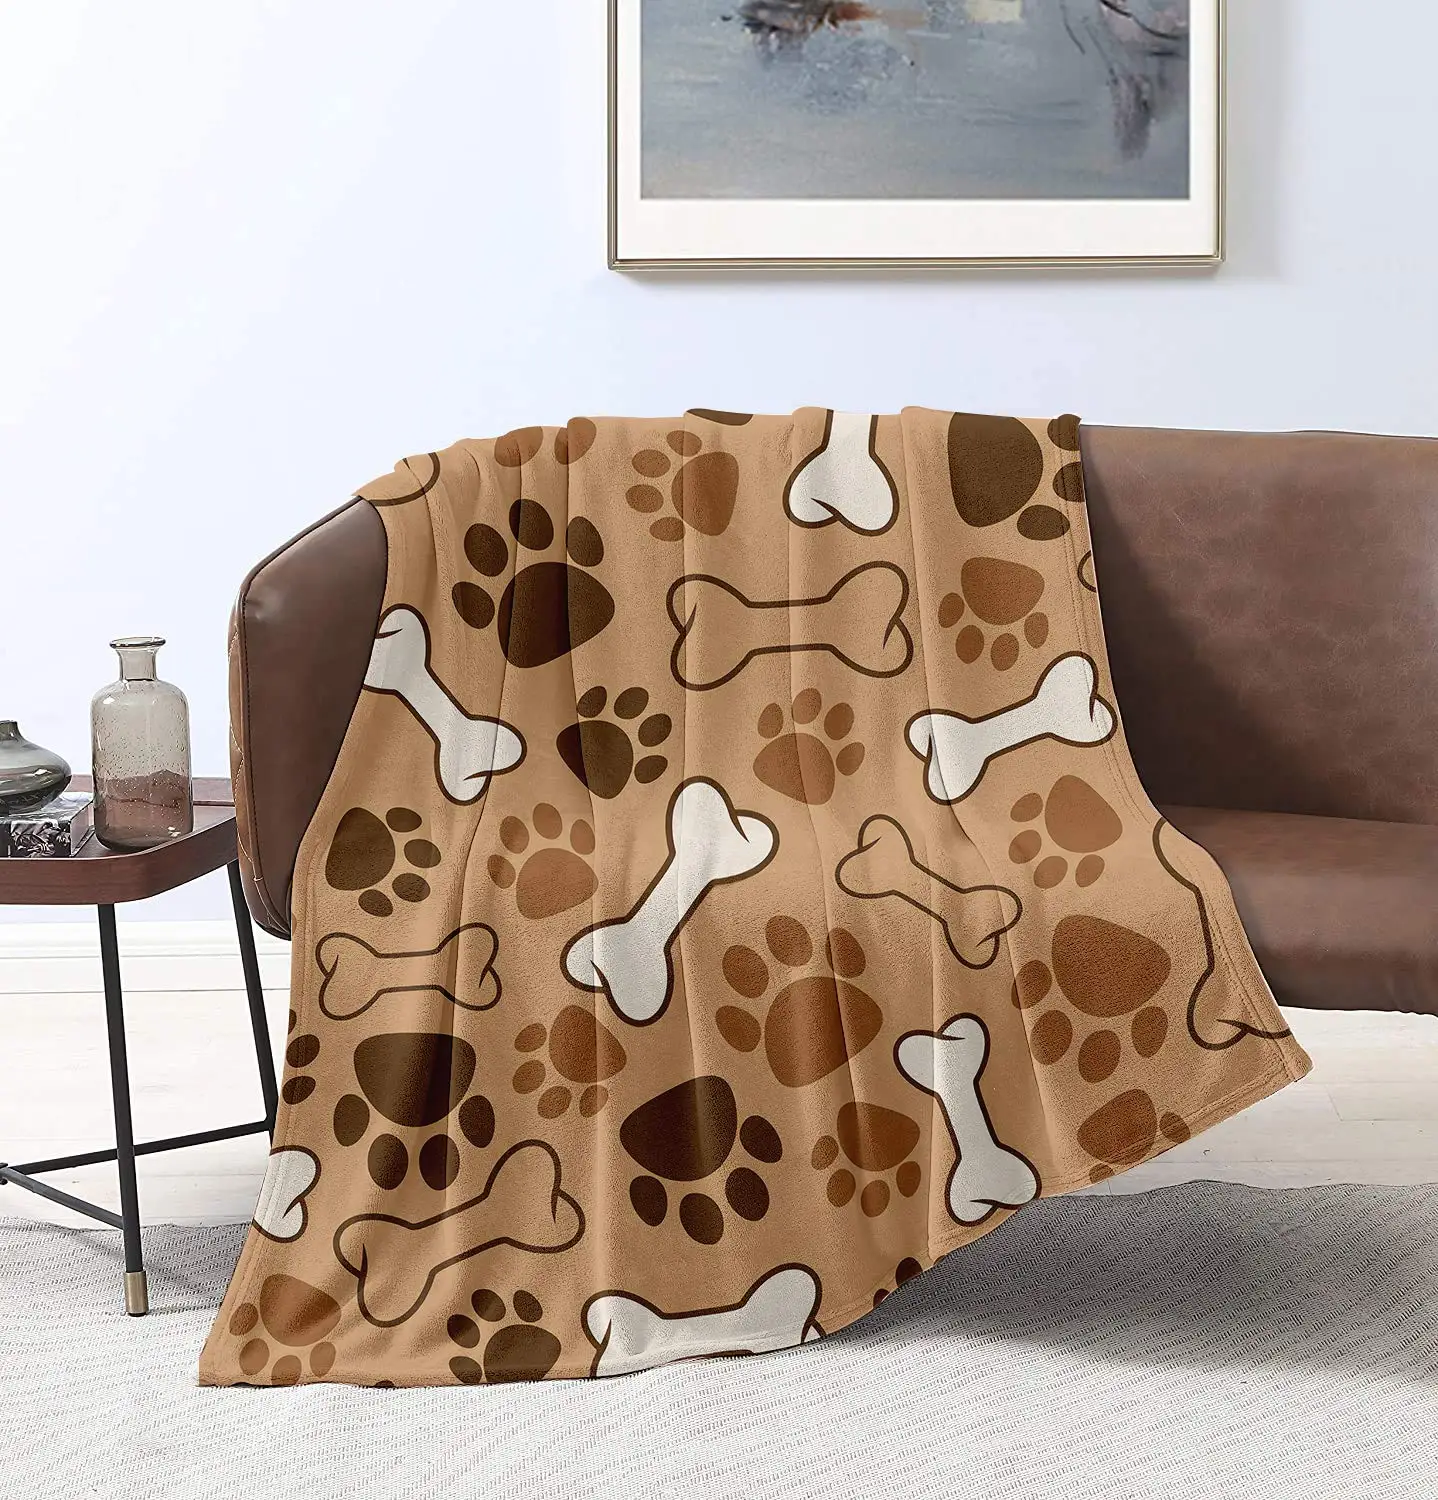 

Dog Paw Print Throw Blanket Super Soft Lightweight Luxurious Cozy Warm Fluffy Plush for Bed Couch Living Room 50"X40"for Kid